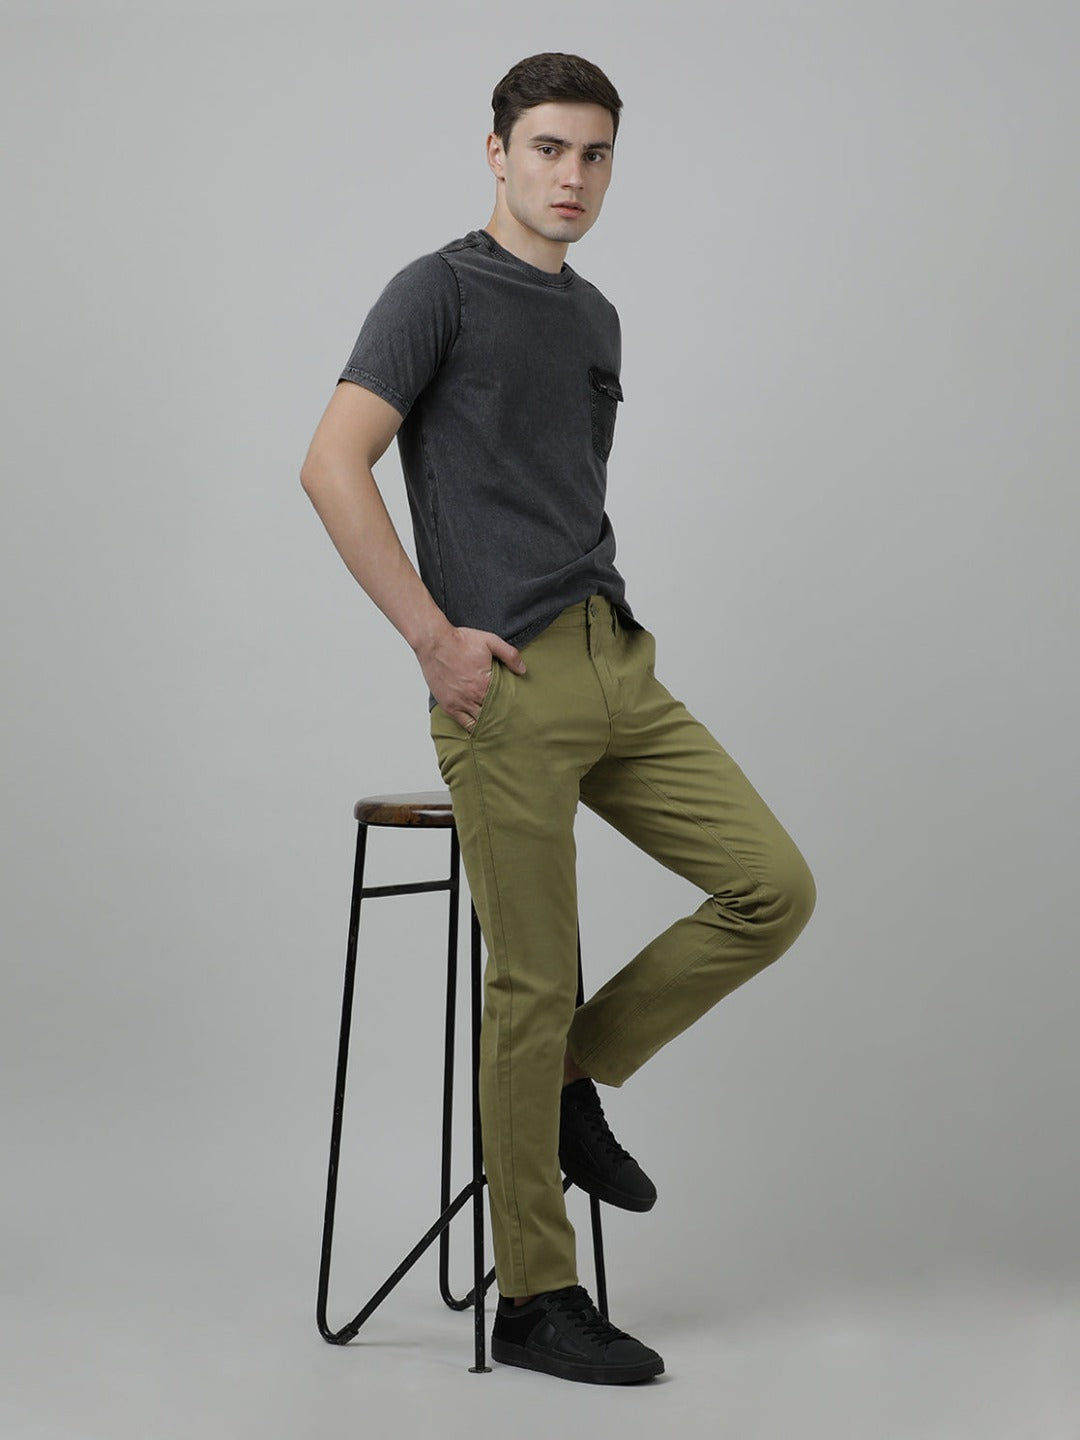 Buy men in class Olive Green Chinos Pants for Men Stretchable Slim Fit  Chinos for Men Slim fit Chinos Trousers for Mens Checked Chinos at Amazon.in